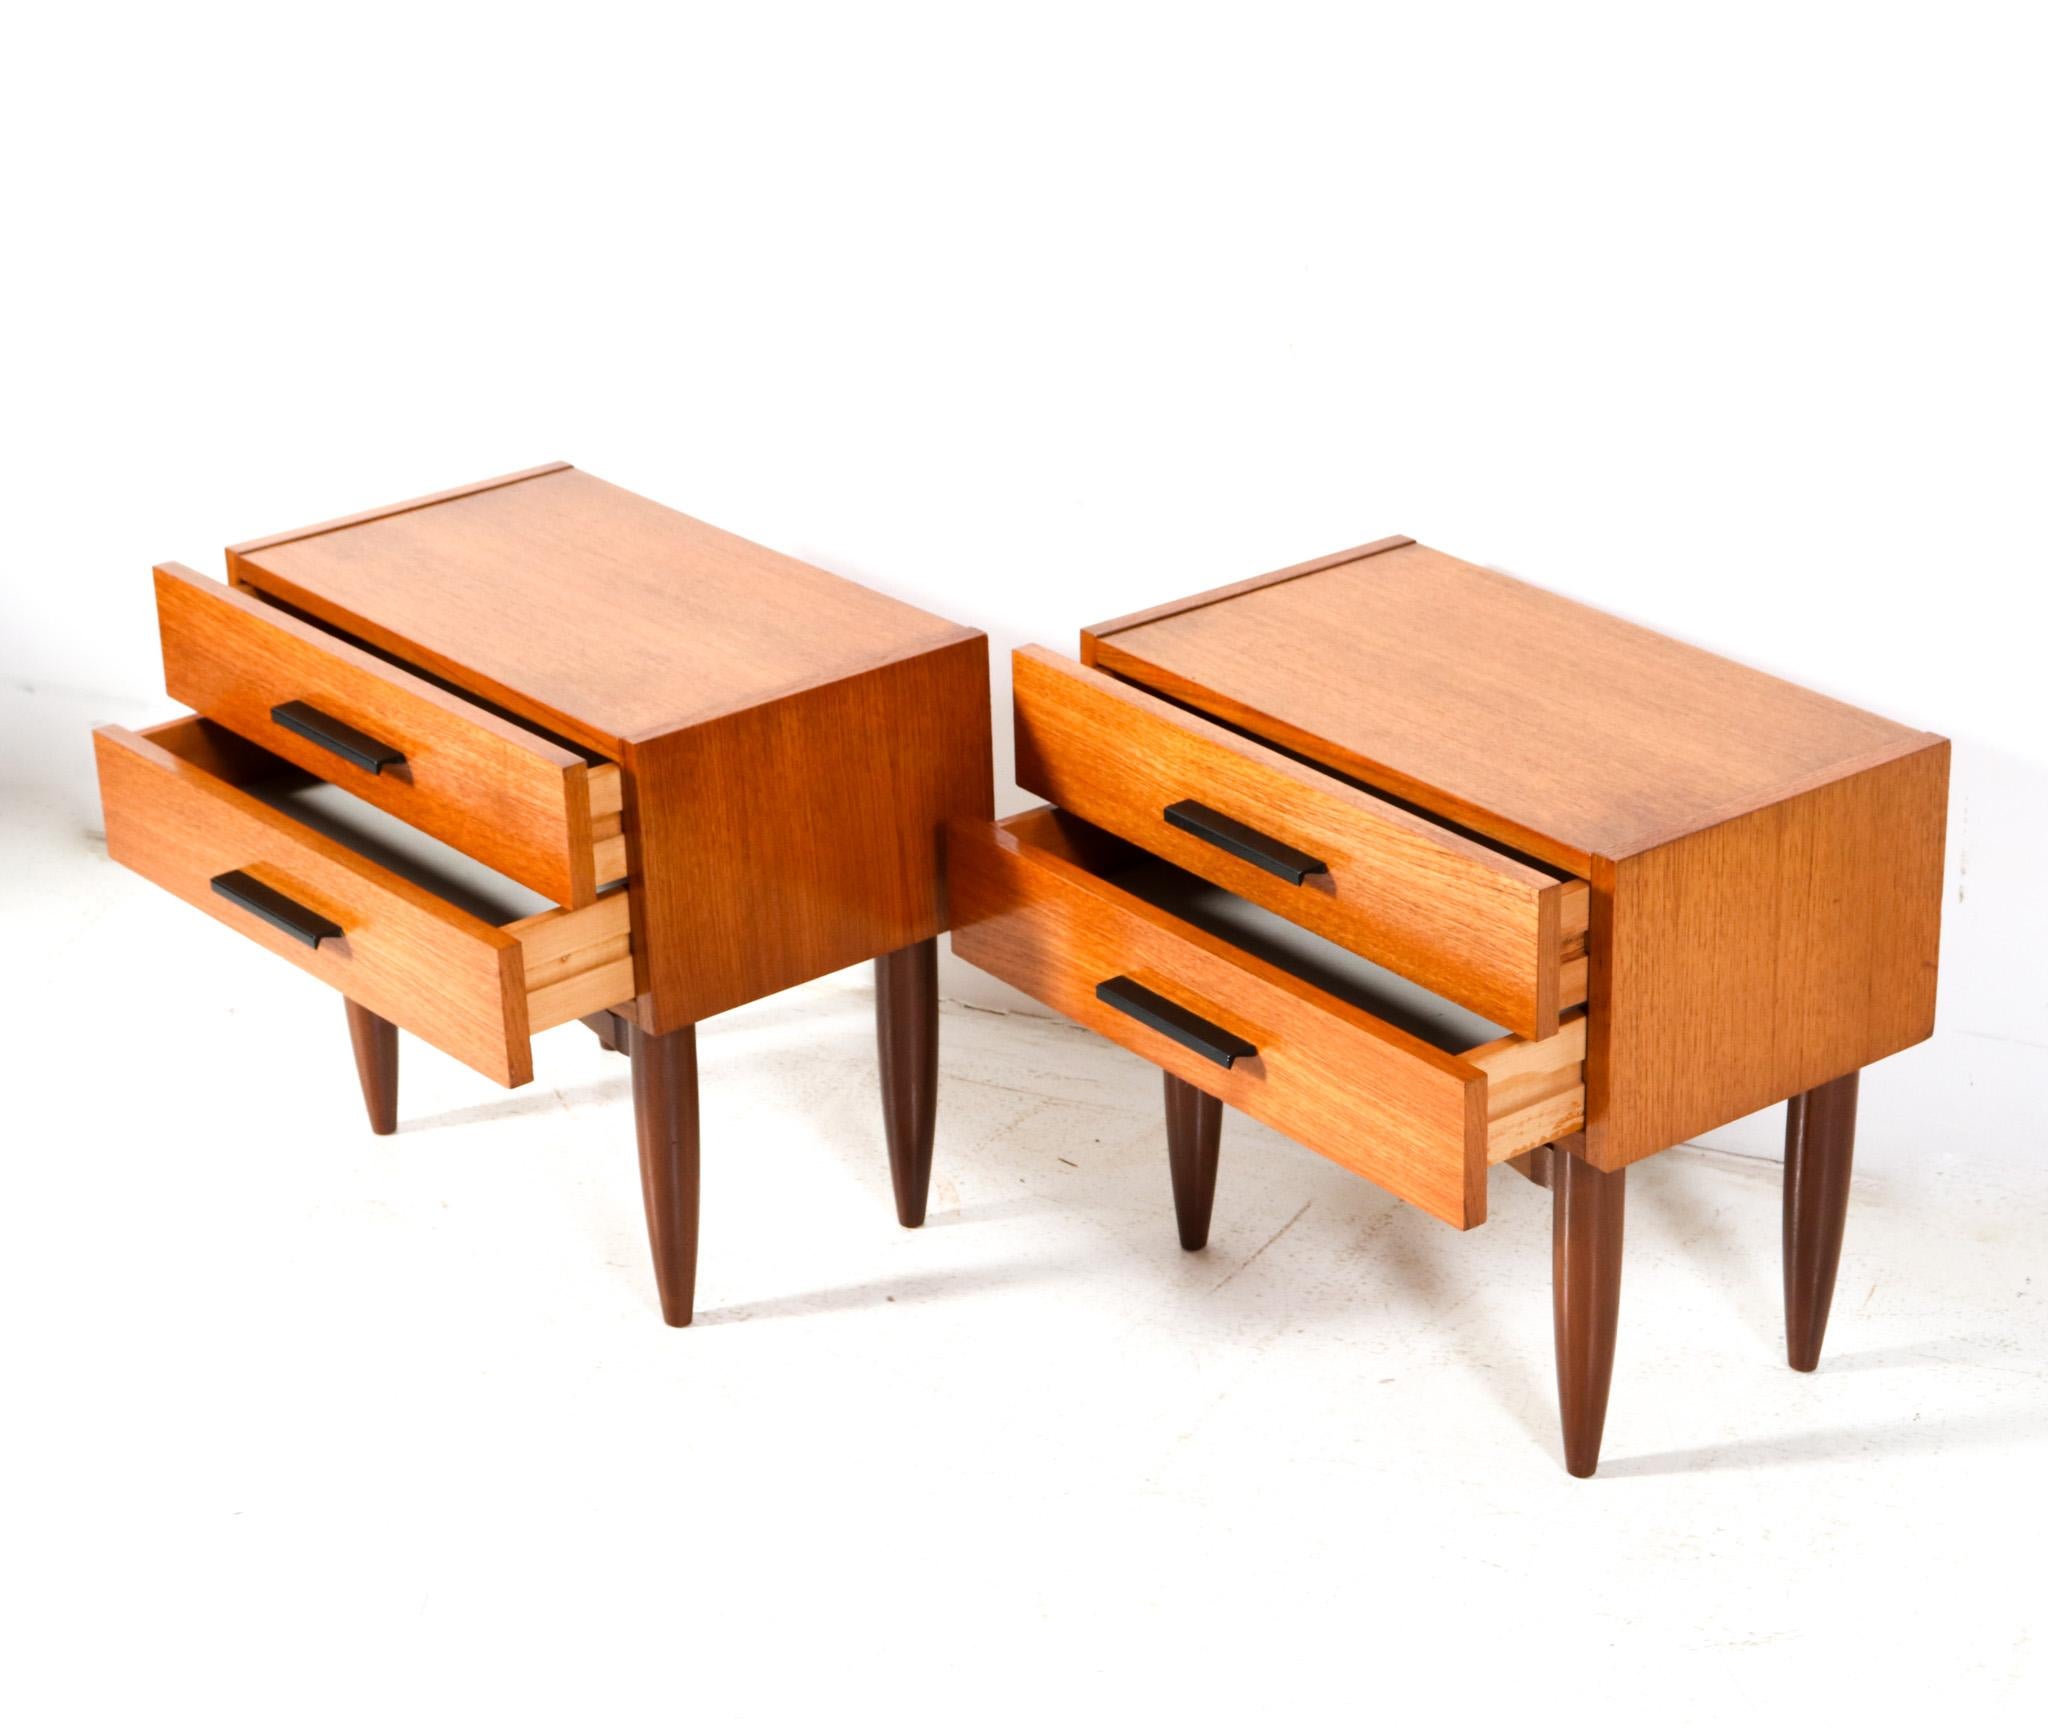 Mid-20th Century Two Teak Mid-Century Modern Nightstands or Bedside Tables, 1960s